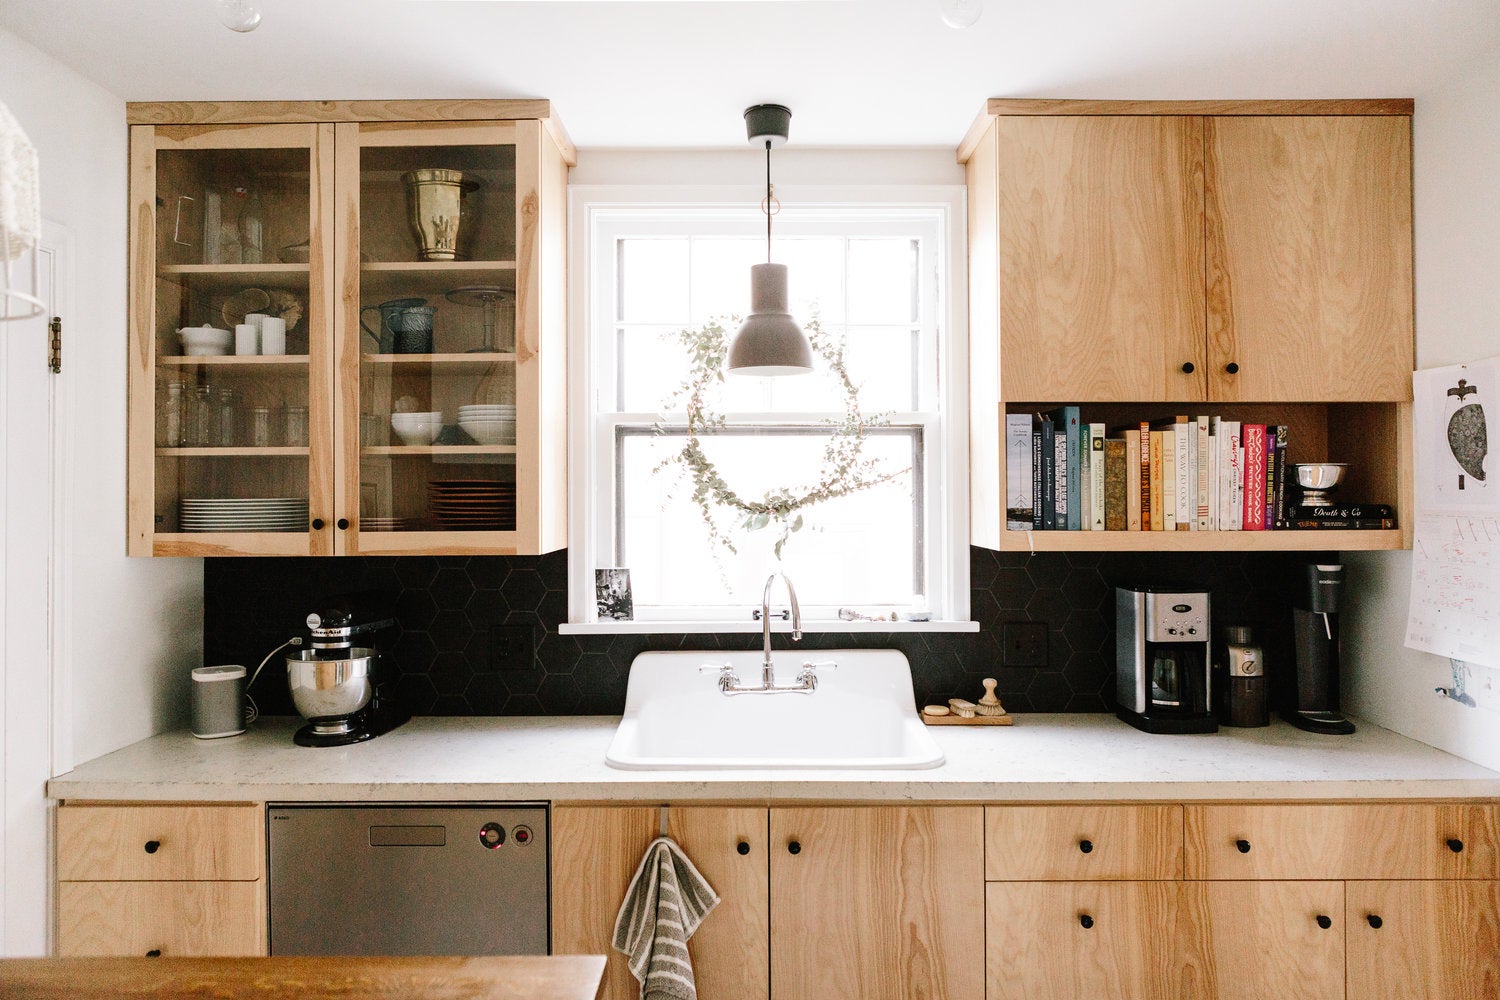 The Best Inexpensive Kitchen Cabinets Designers Swear By   domino